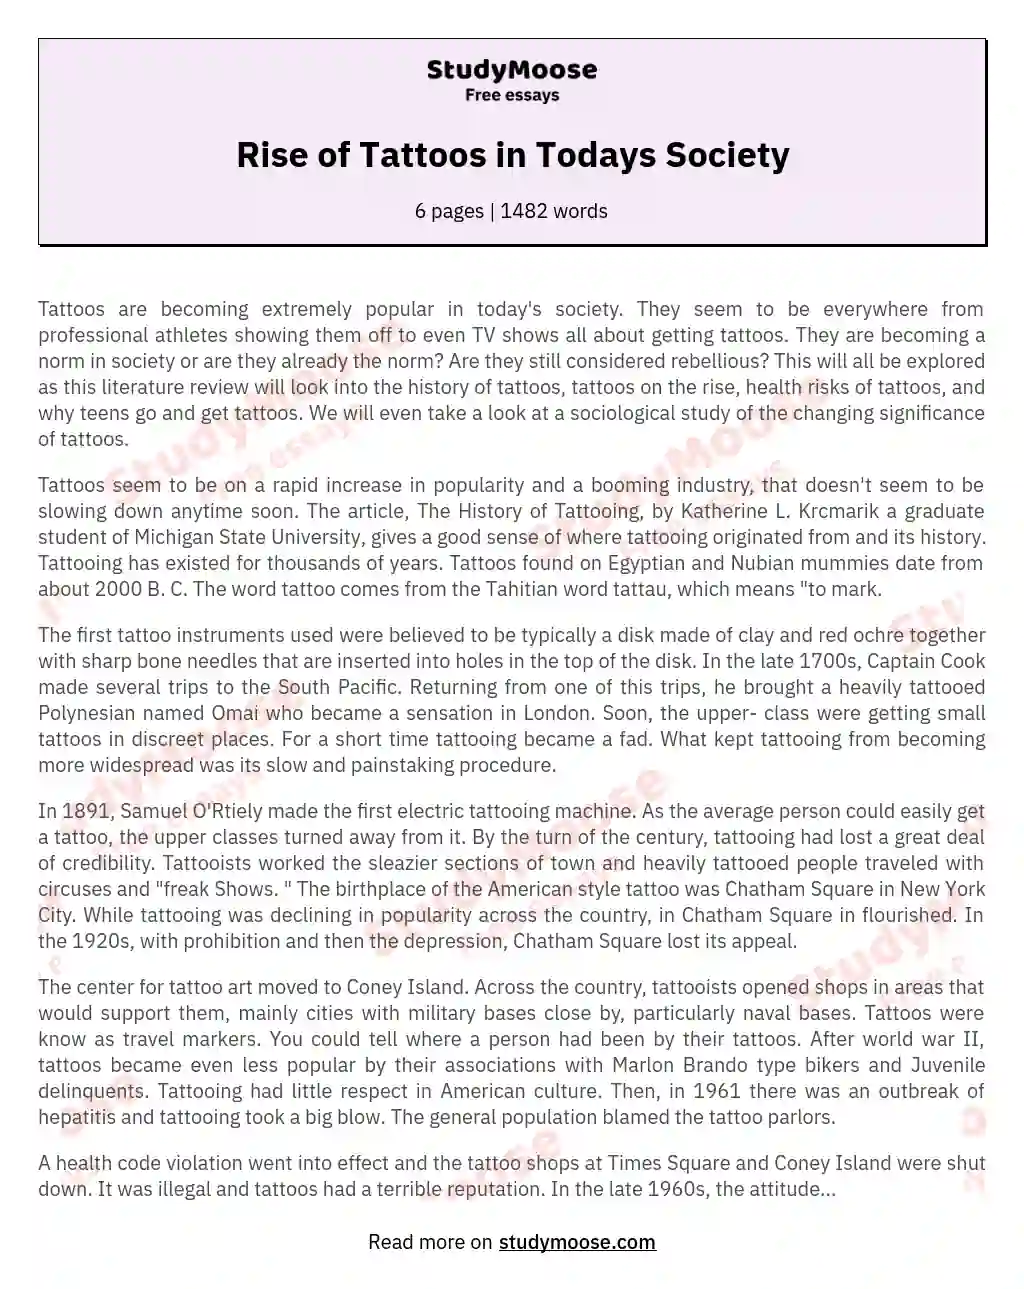 Rise of Tattoos in Todays Society